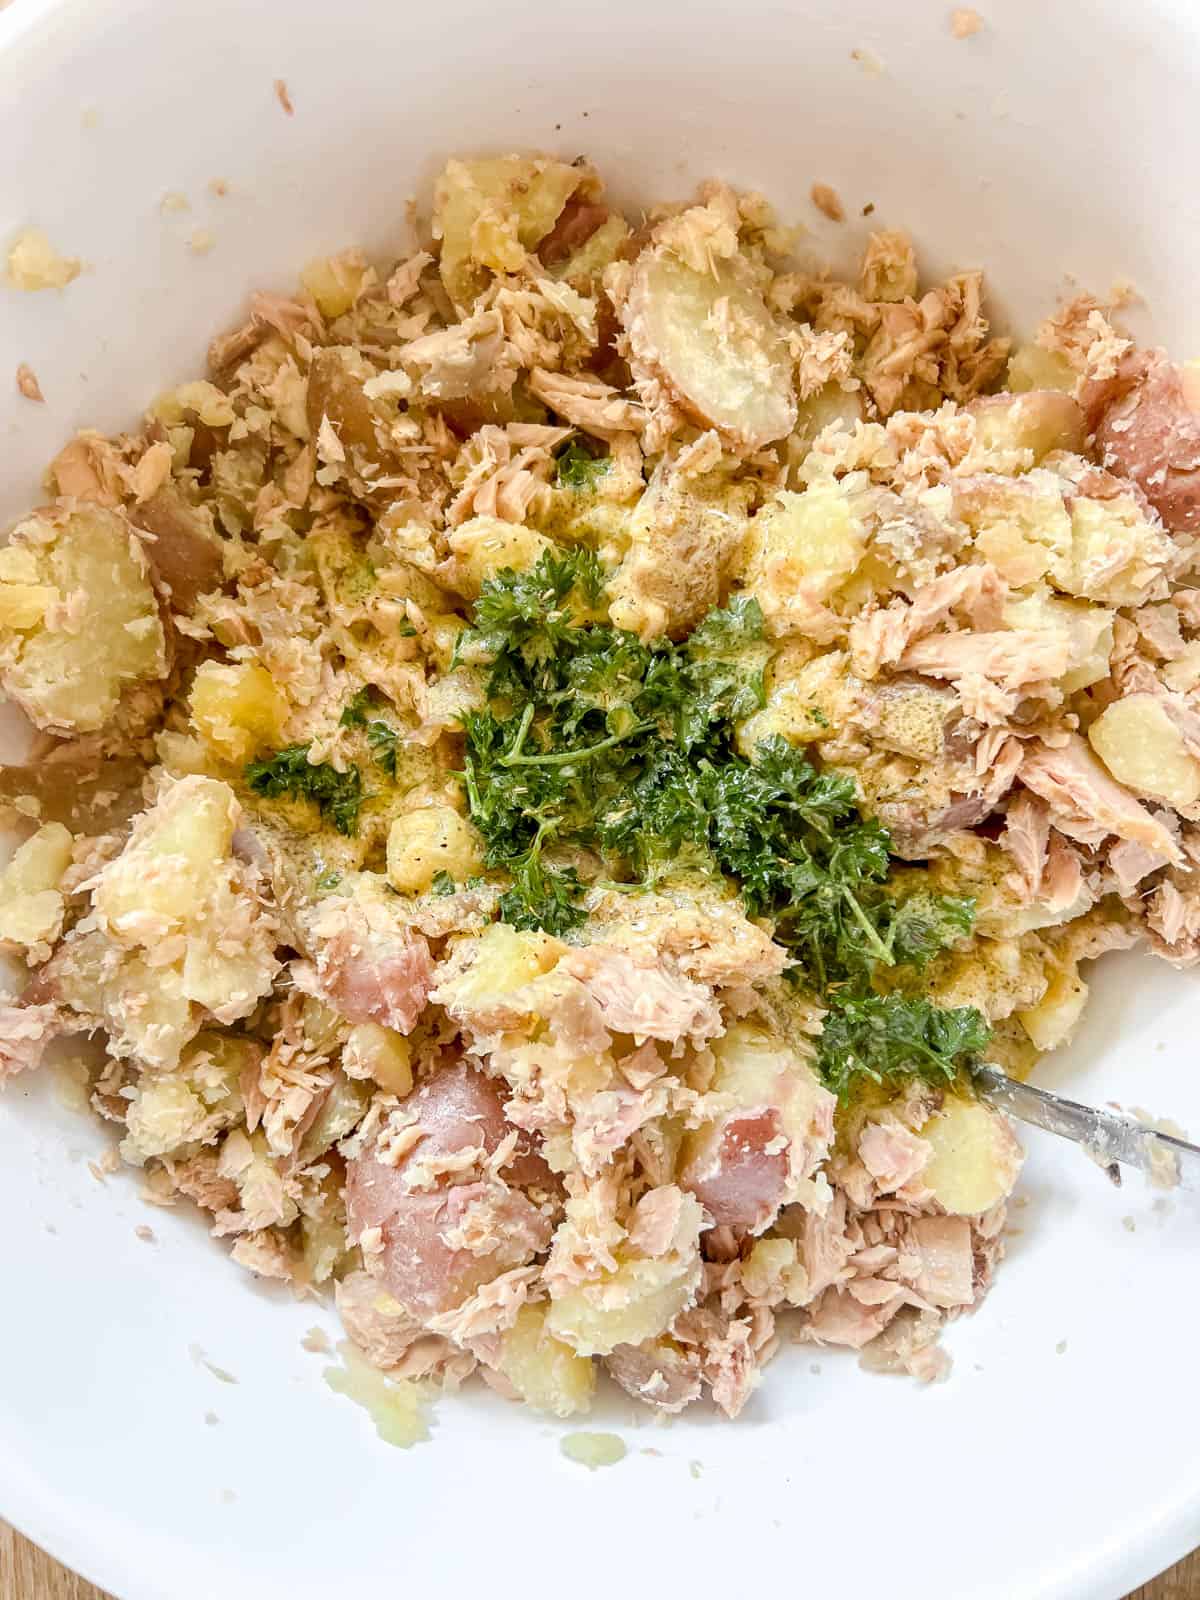 Tuna, potatoes and dressing in a bowl.